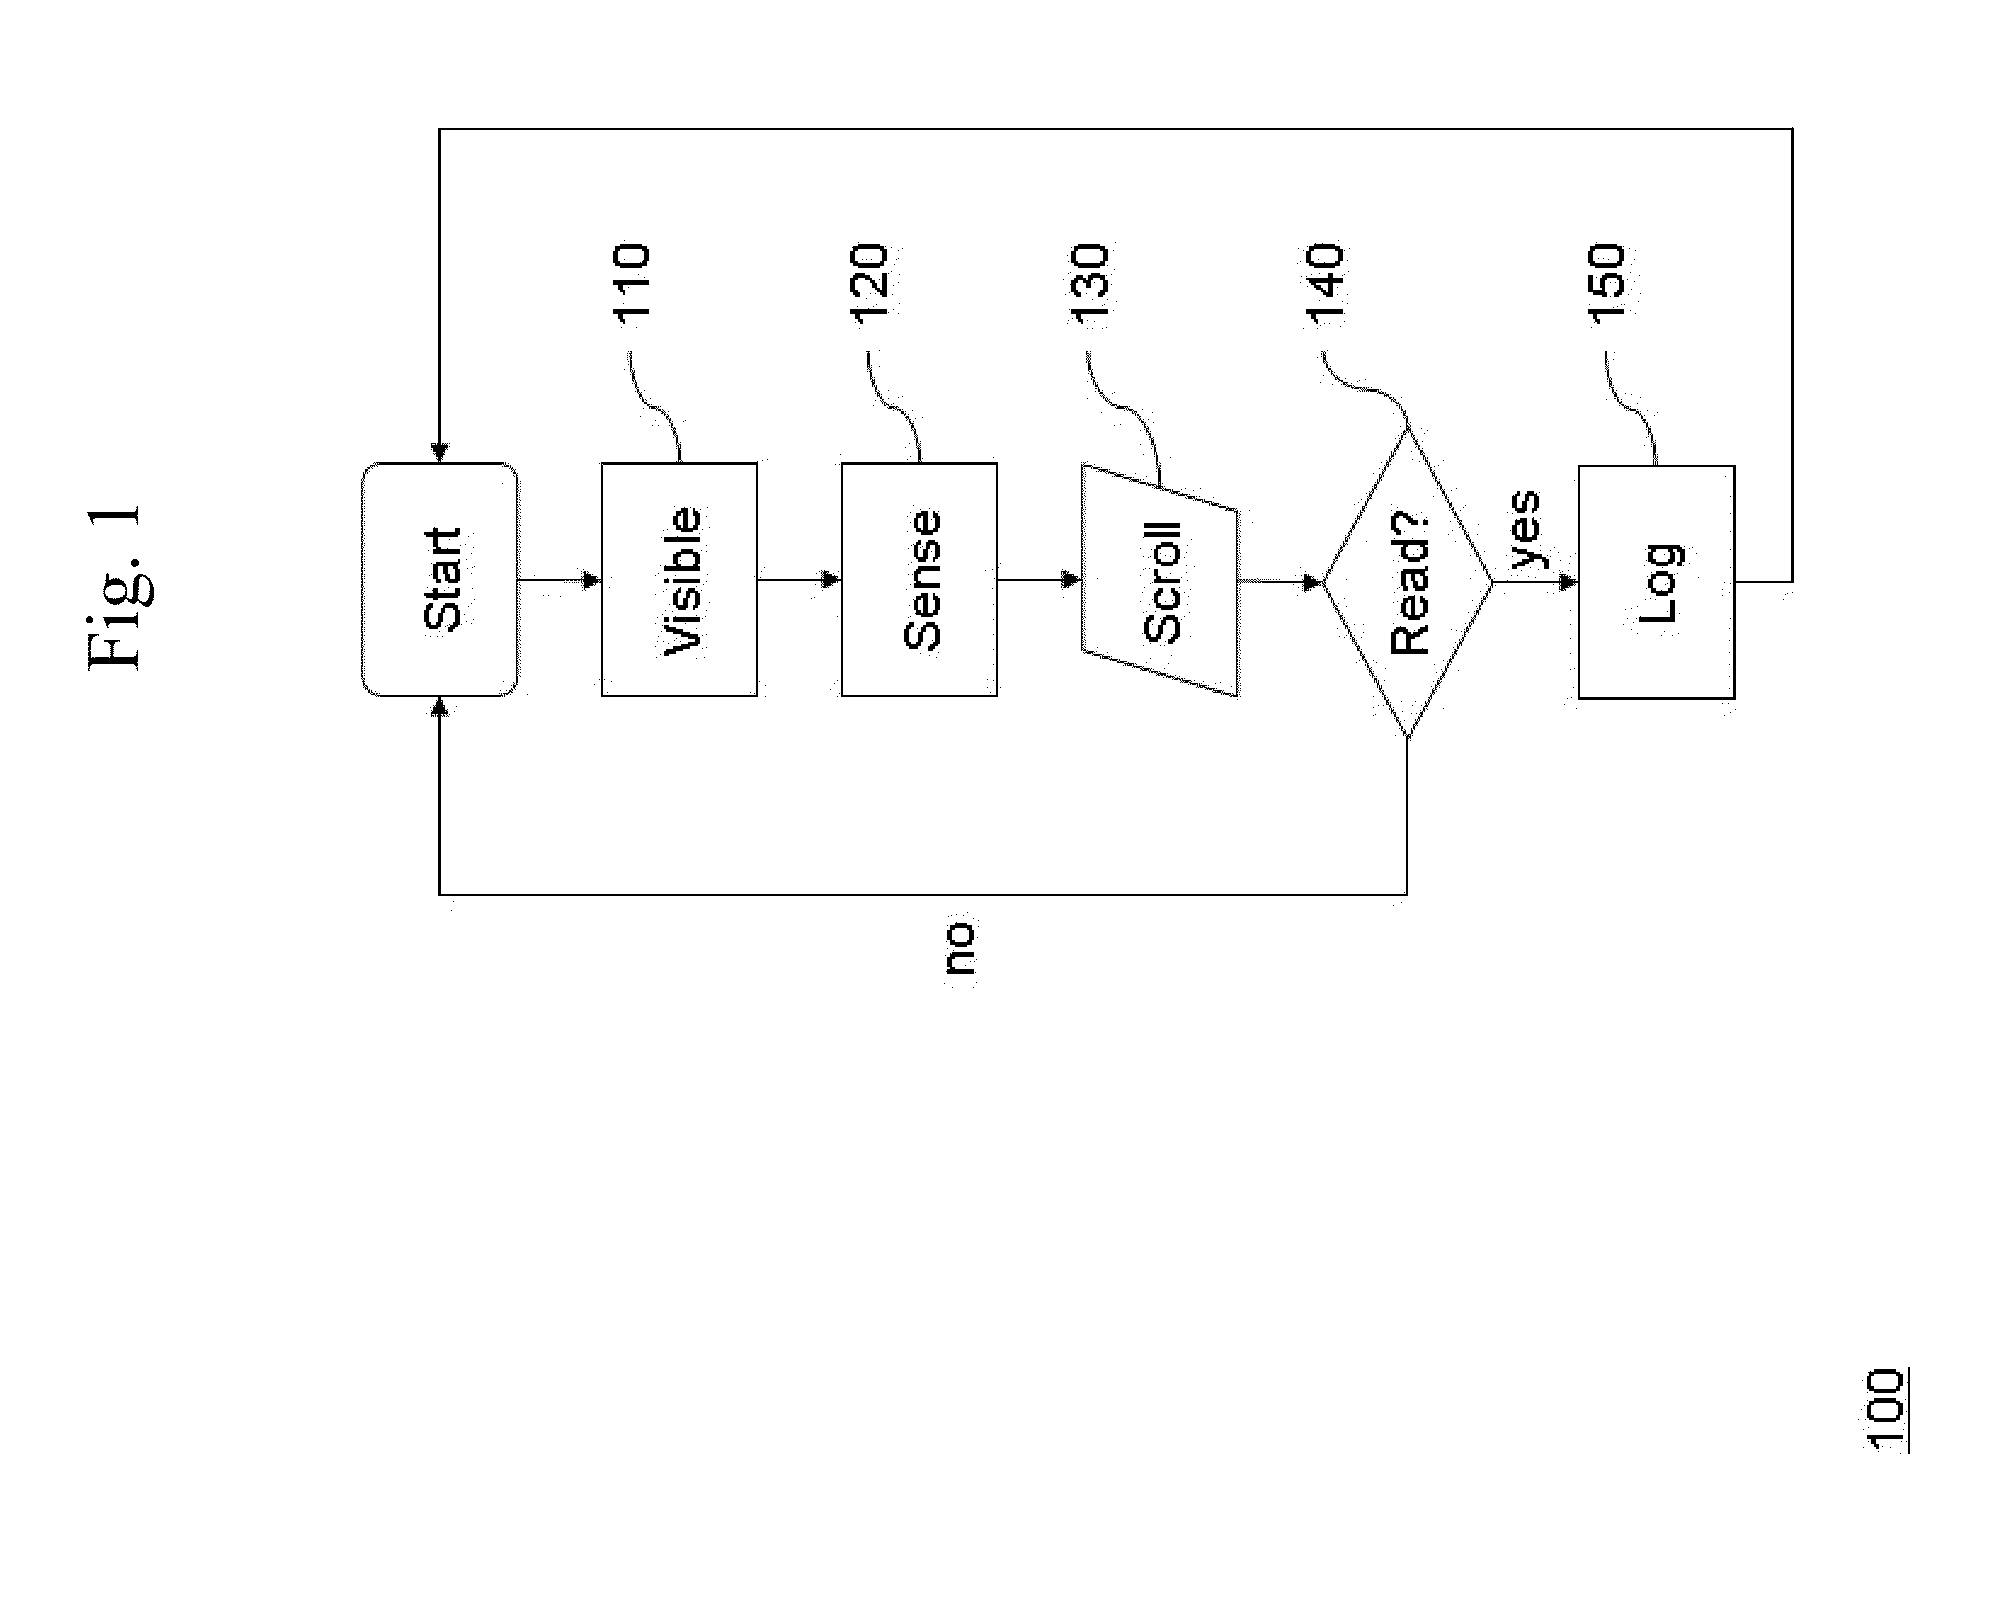 Method and Device for Tracking Interactions of a User with an Electronic Document